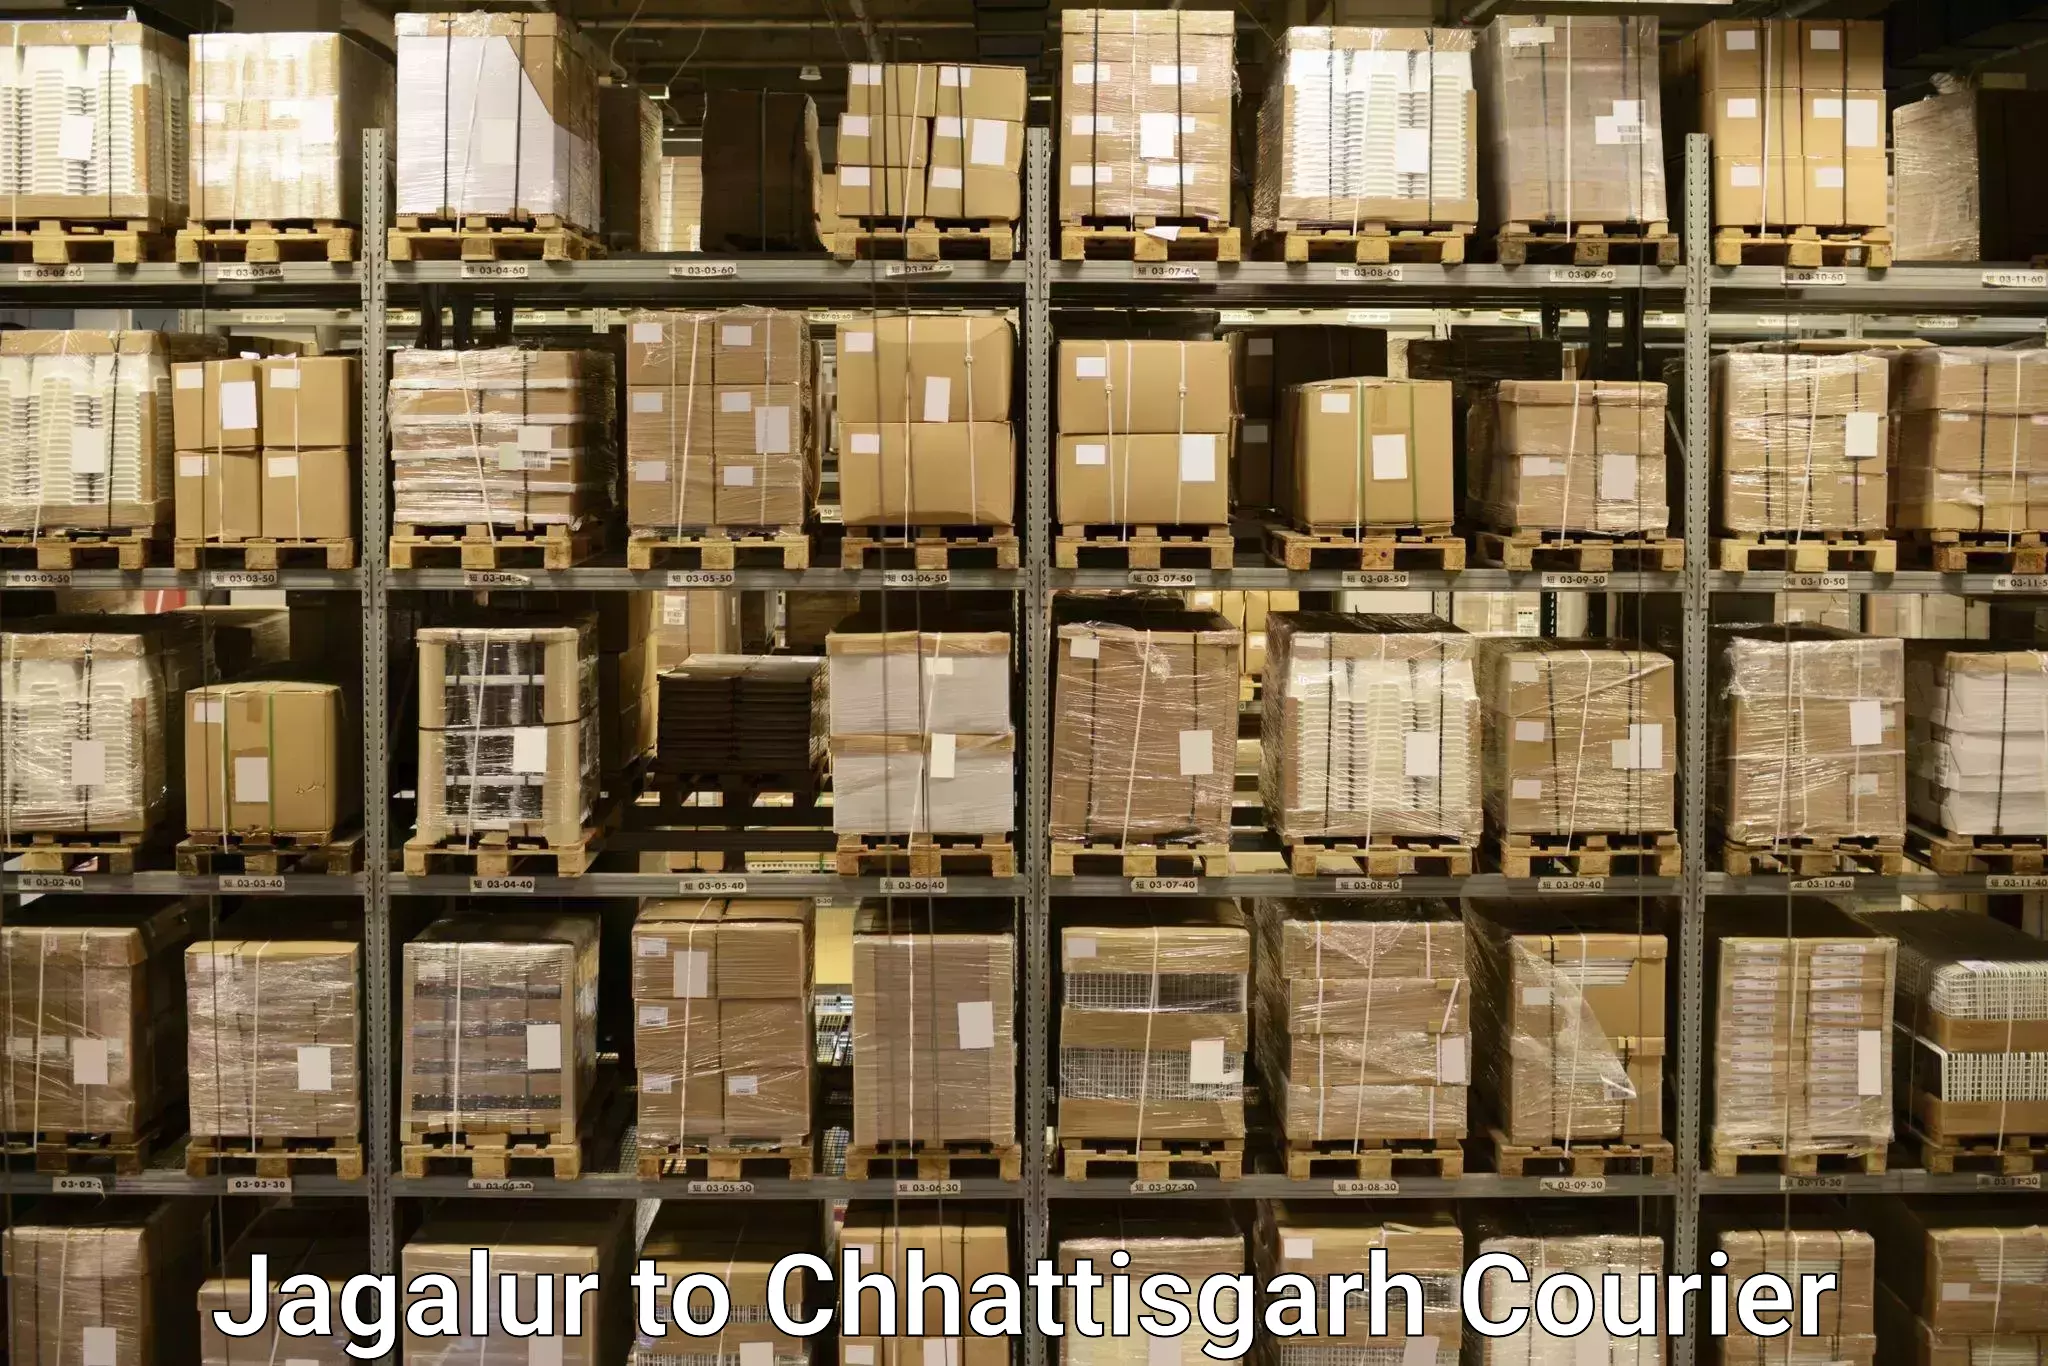 Personal effects shipping Jagalur to Chhattisgarh